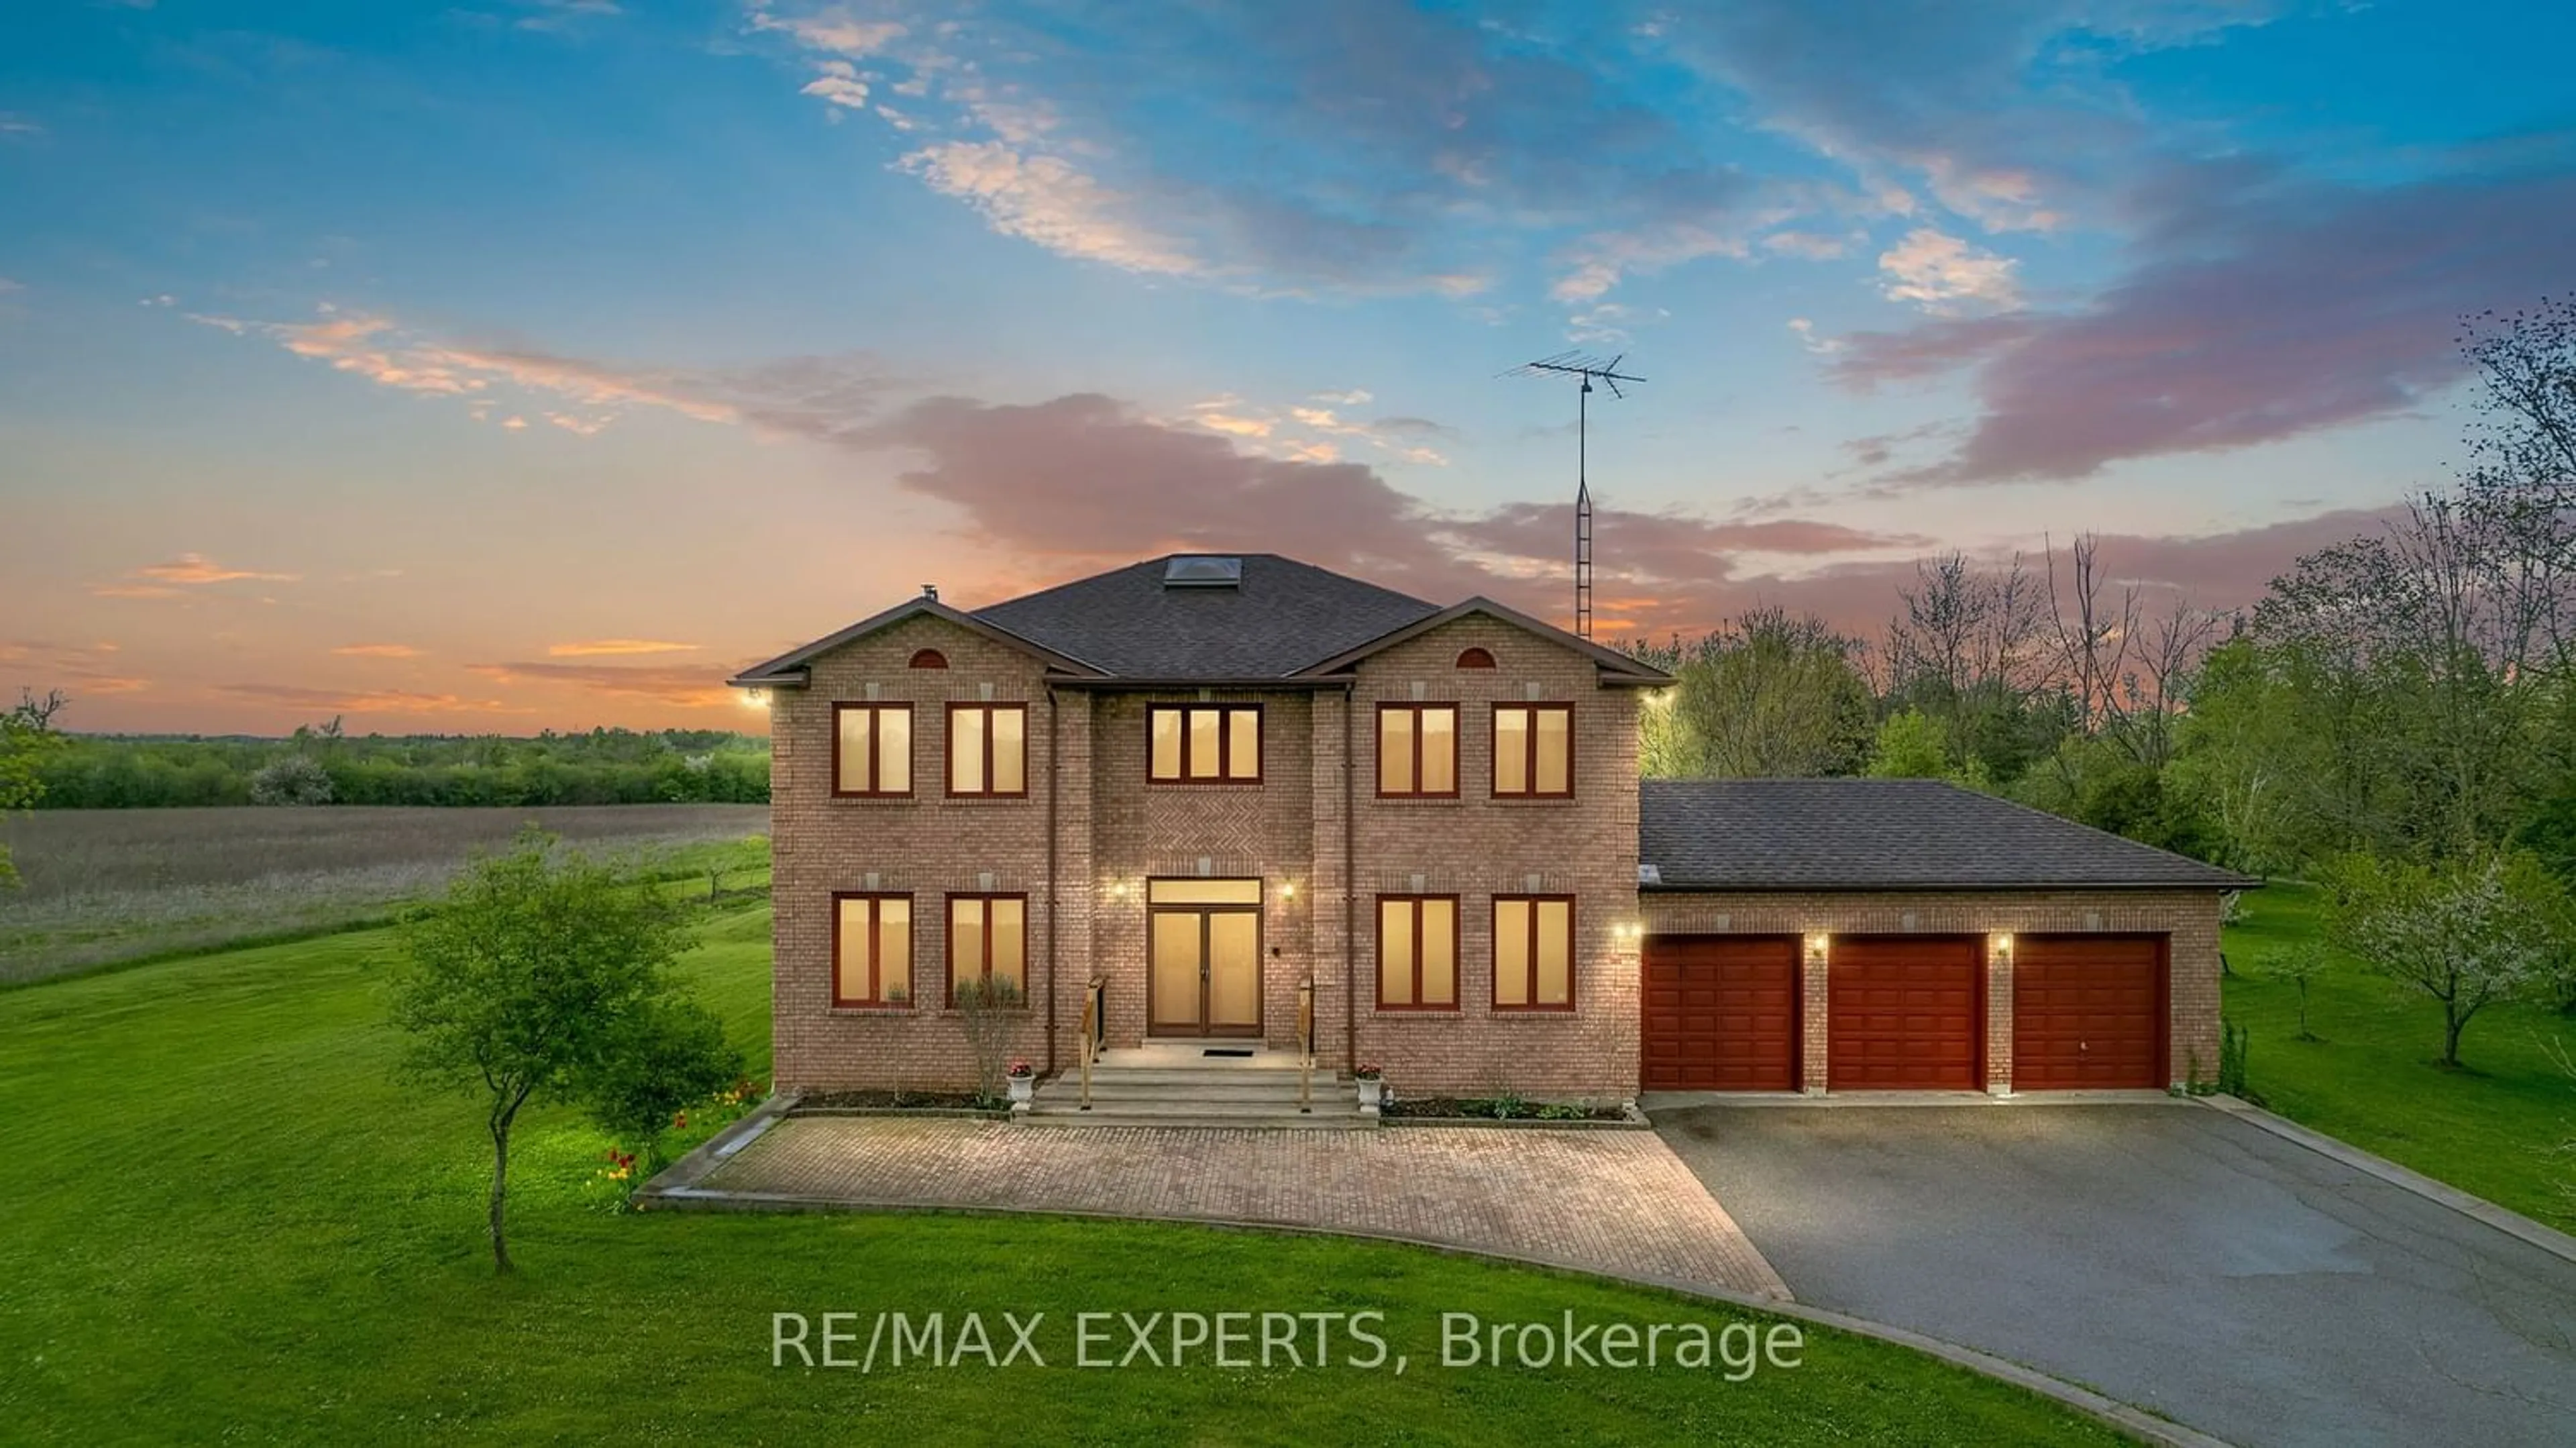 Home with brick exterior material for 13529 Centreville Creek Rd, Caledon Ontario L7C 3B9